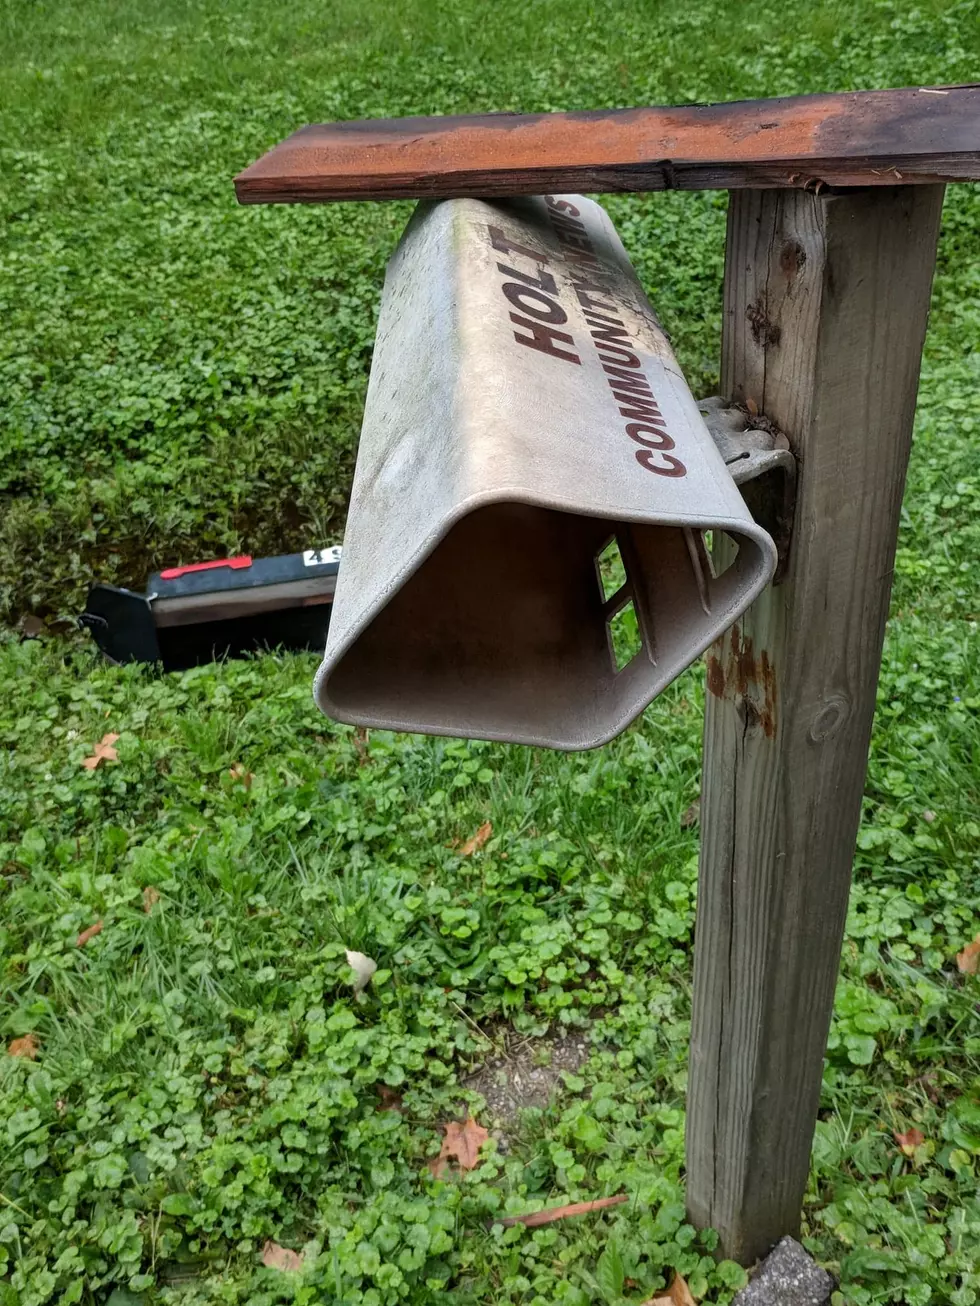 Cowardly Vandals Take Frustrations Out On Holt Mailboxes